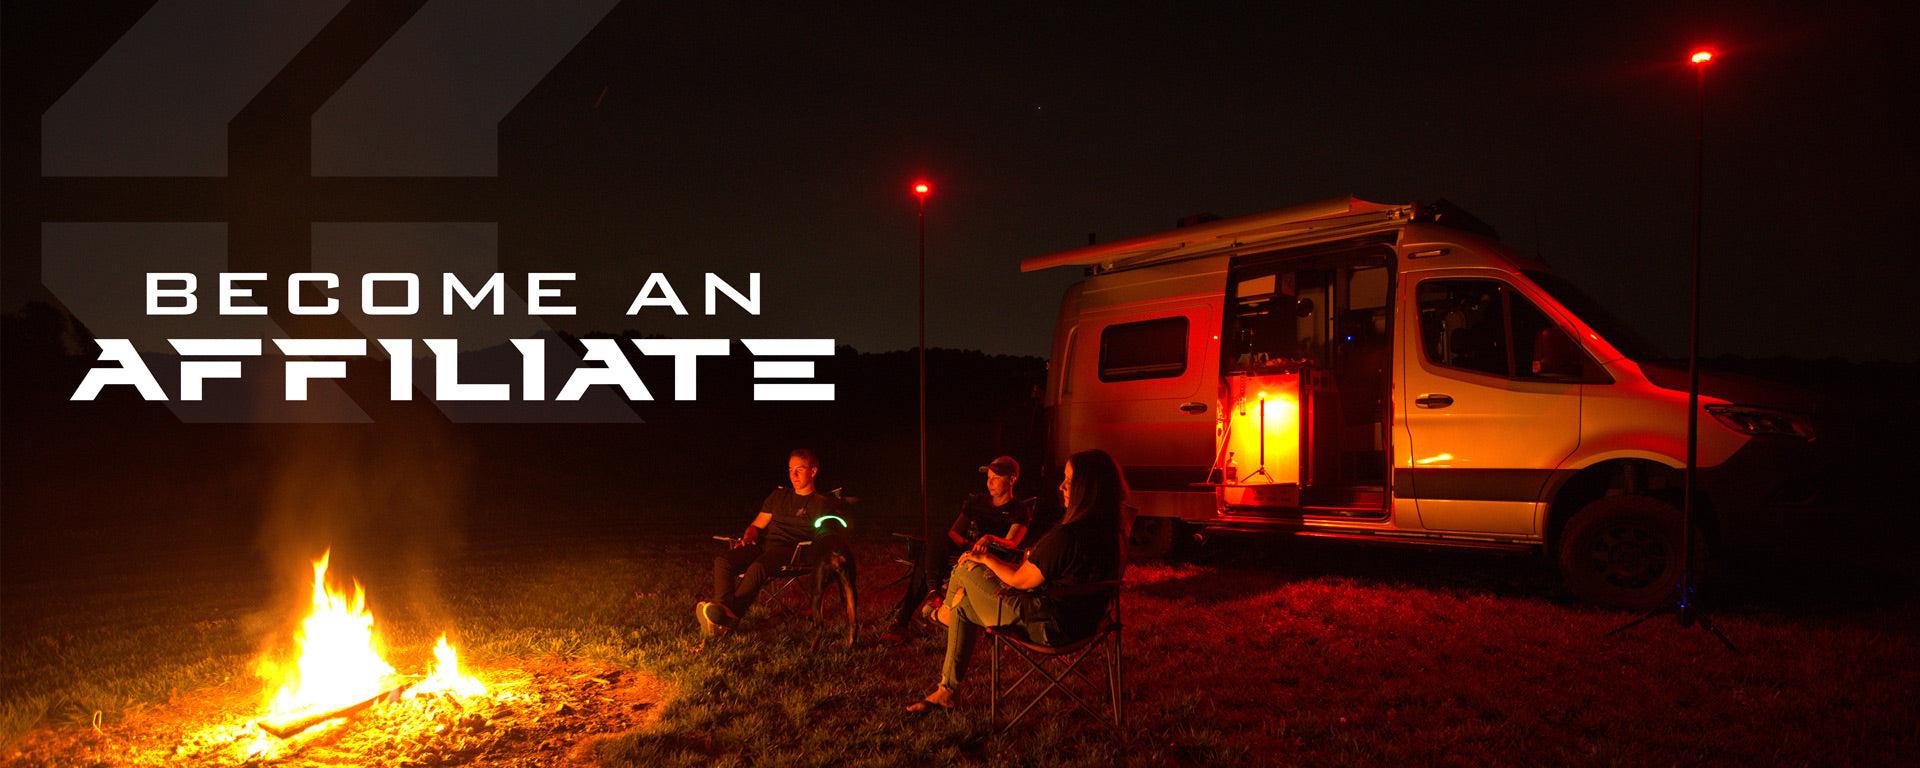 STKR's 'become an affiliate' banner. Image of 3 people sitting in-between a camper van and a campfire at night. Two STKR FLi OVER-LANDER telescoping lights are also lighting up the area.